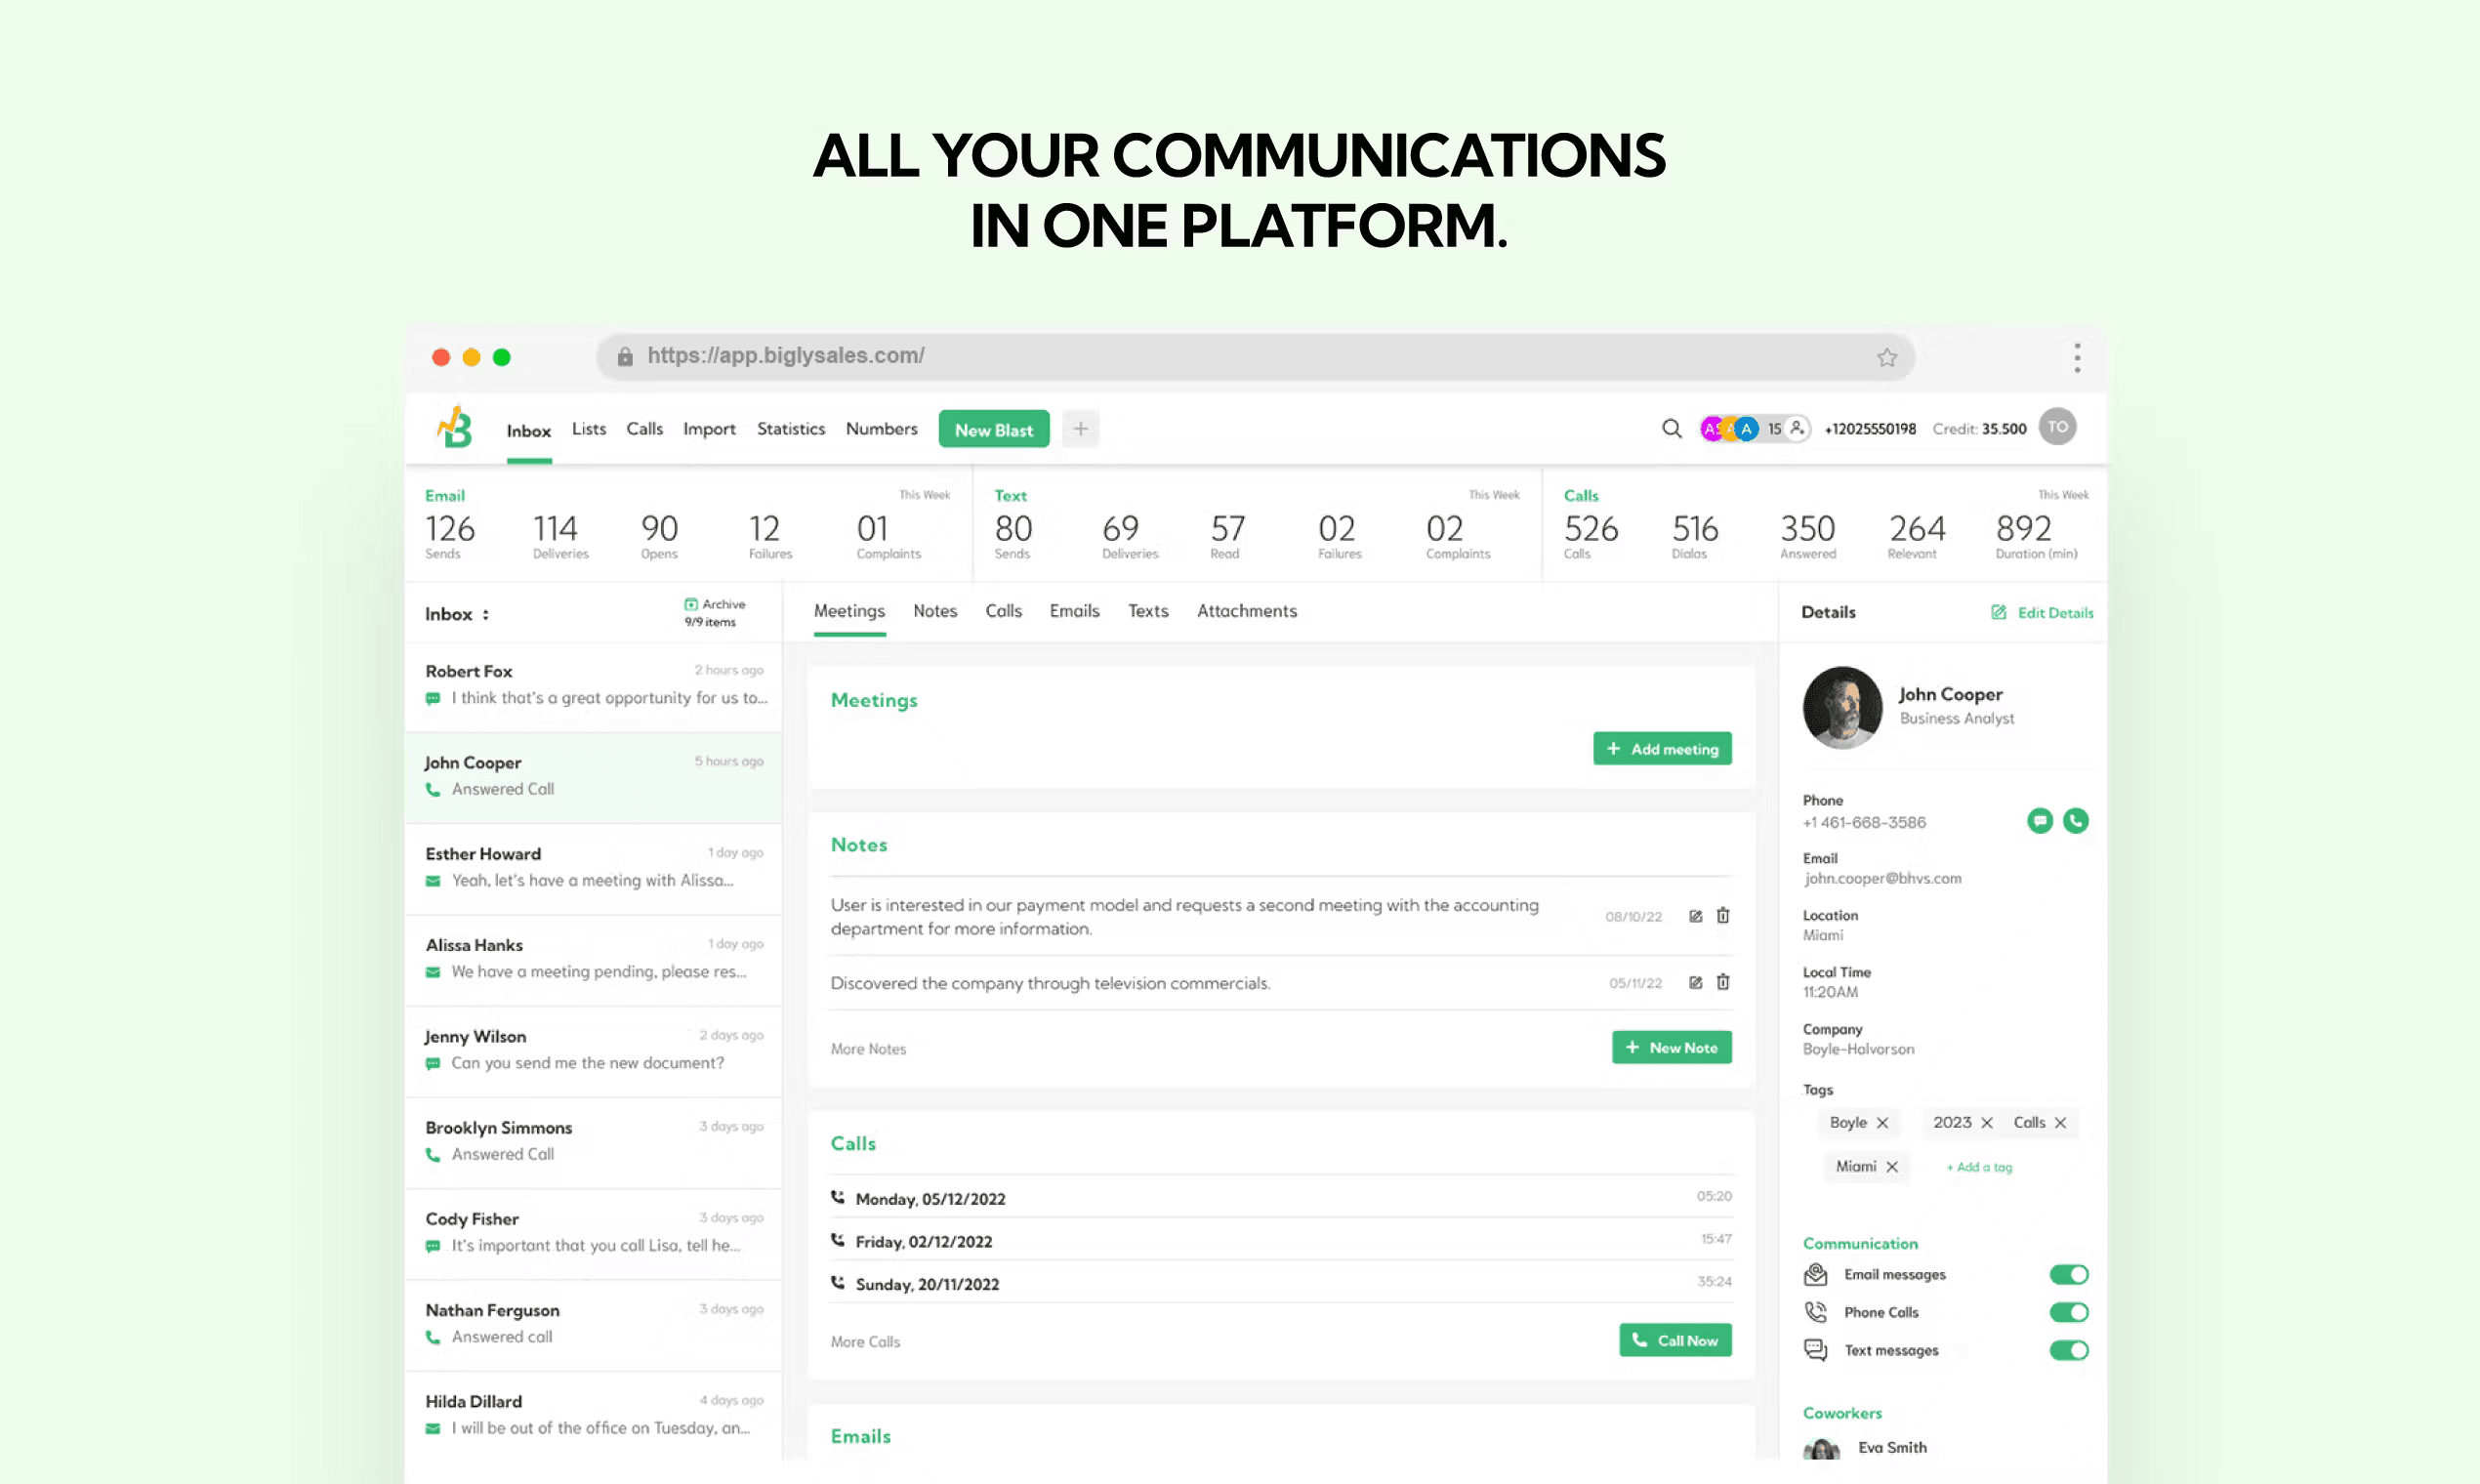 All your communications on one platform. Unified inbox, text, email, calls, meetings, calendar, reporting and tasks all on one screen.